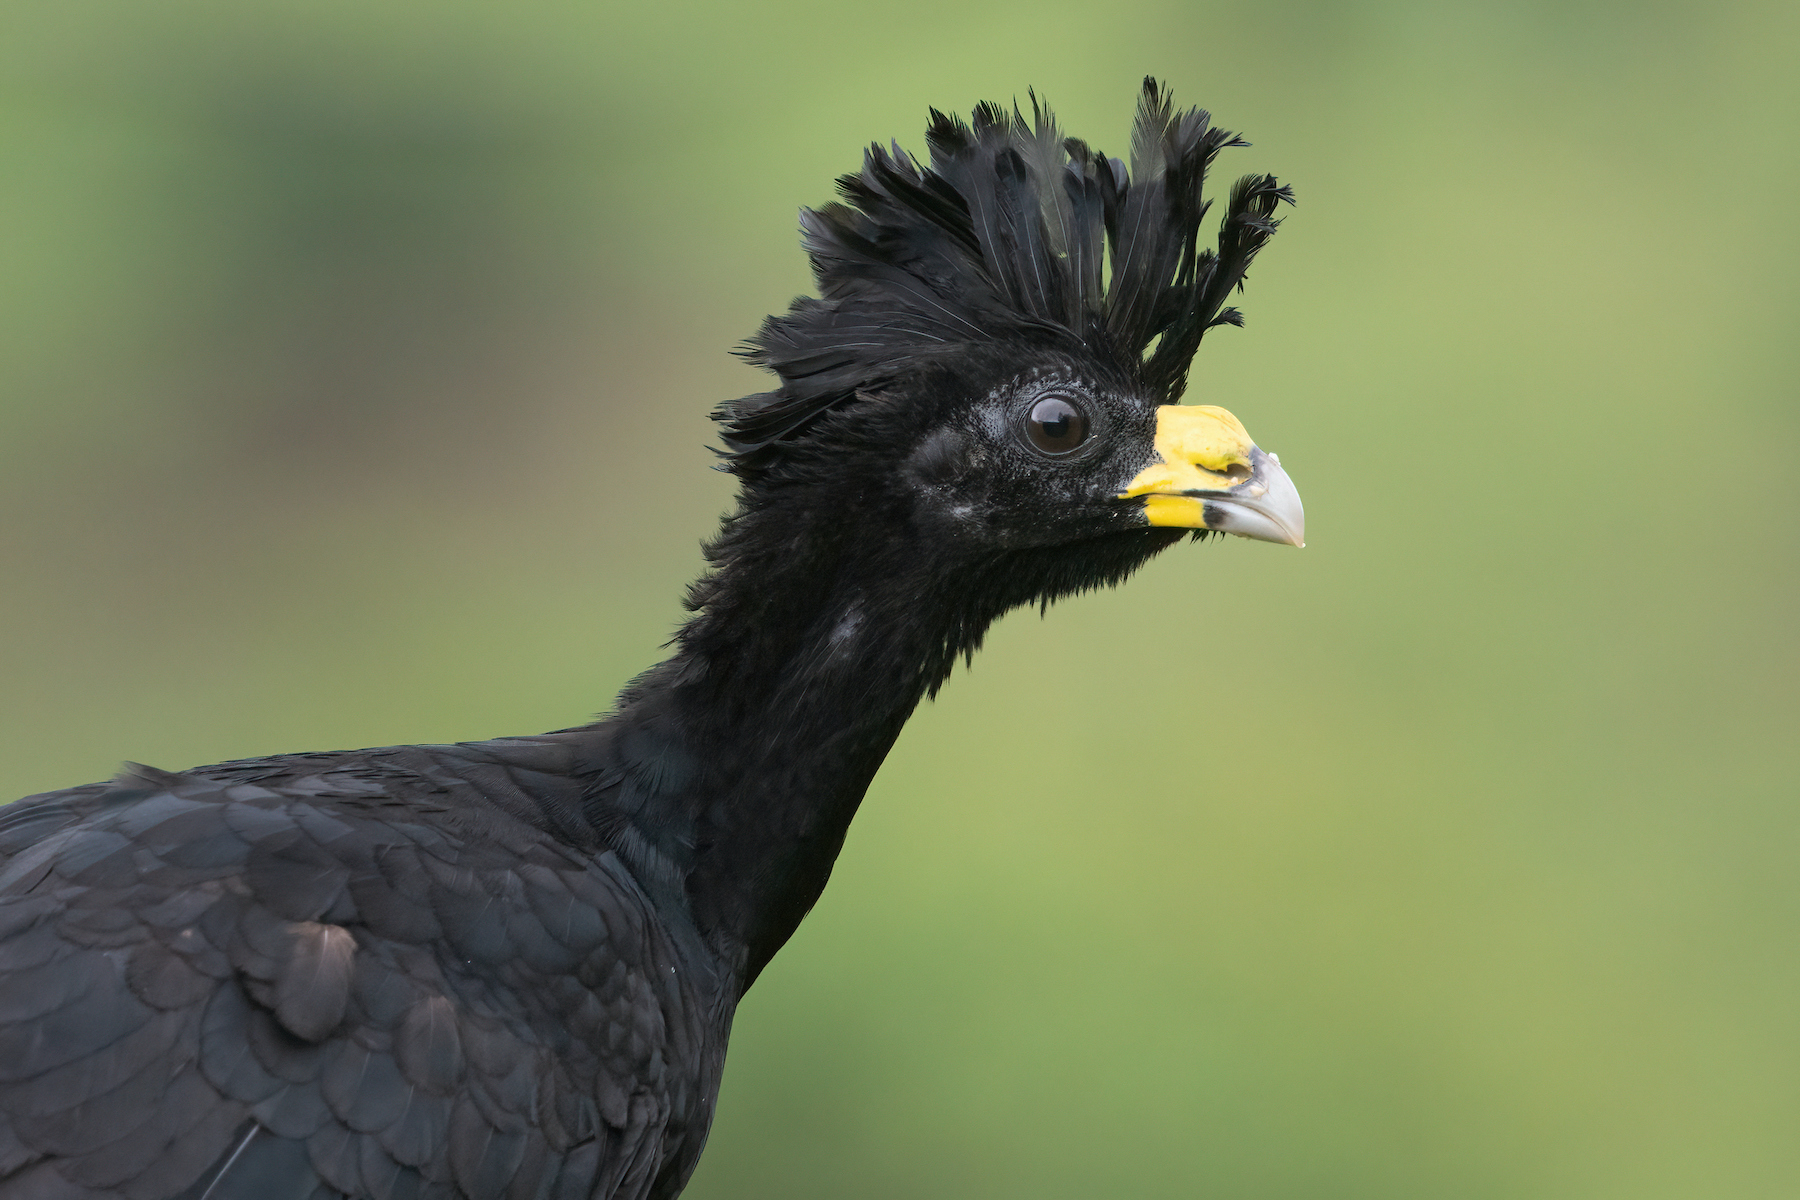 Portrait of a Great Curassow on our Costa Rica wildlife photography tour